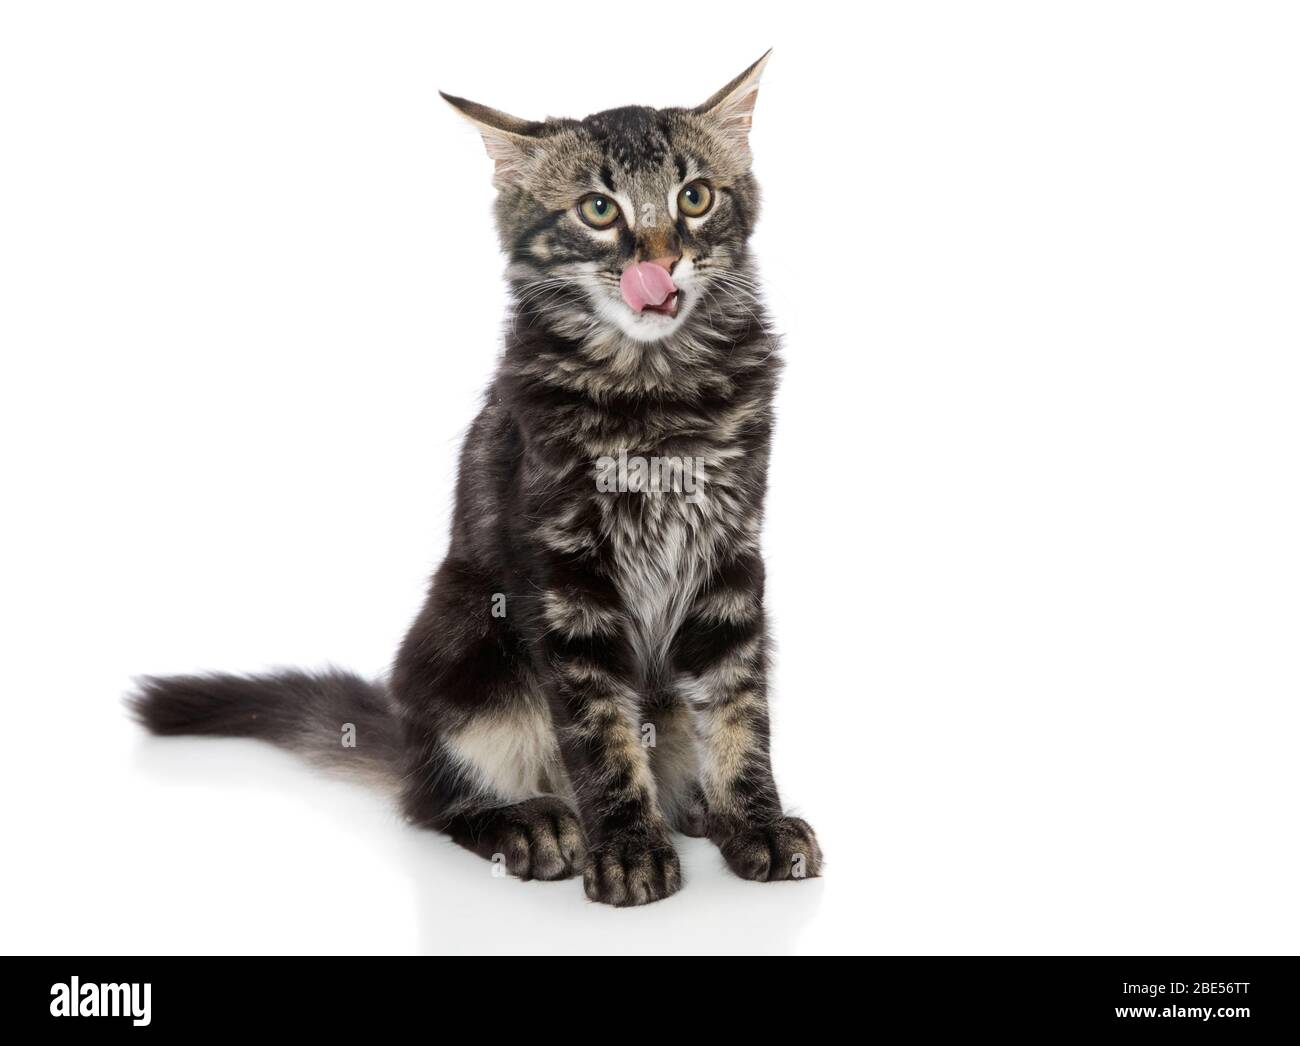 A cat sitting and licking lips. Stock Photo